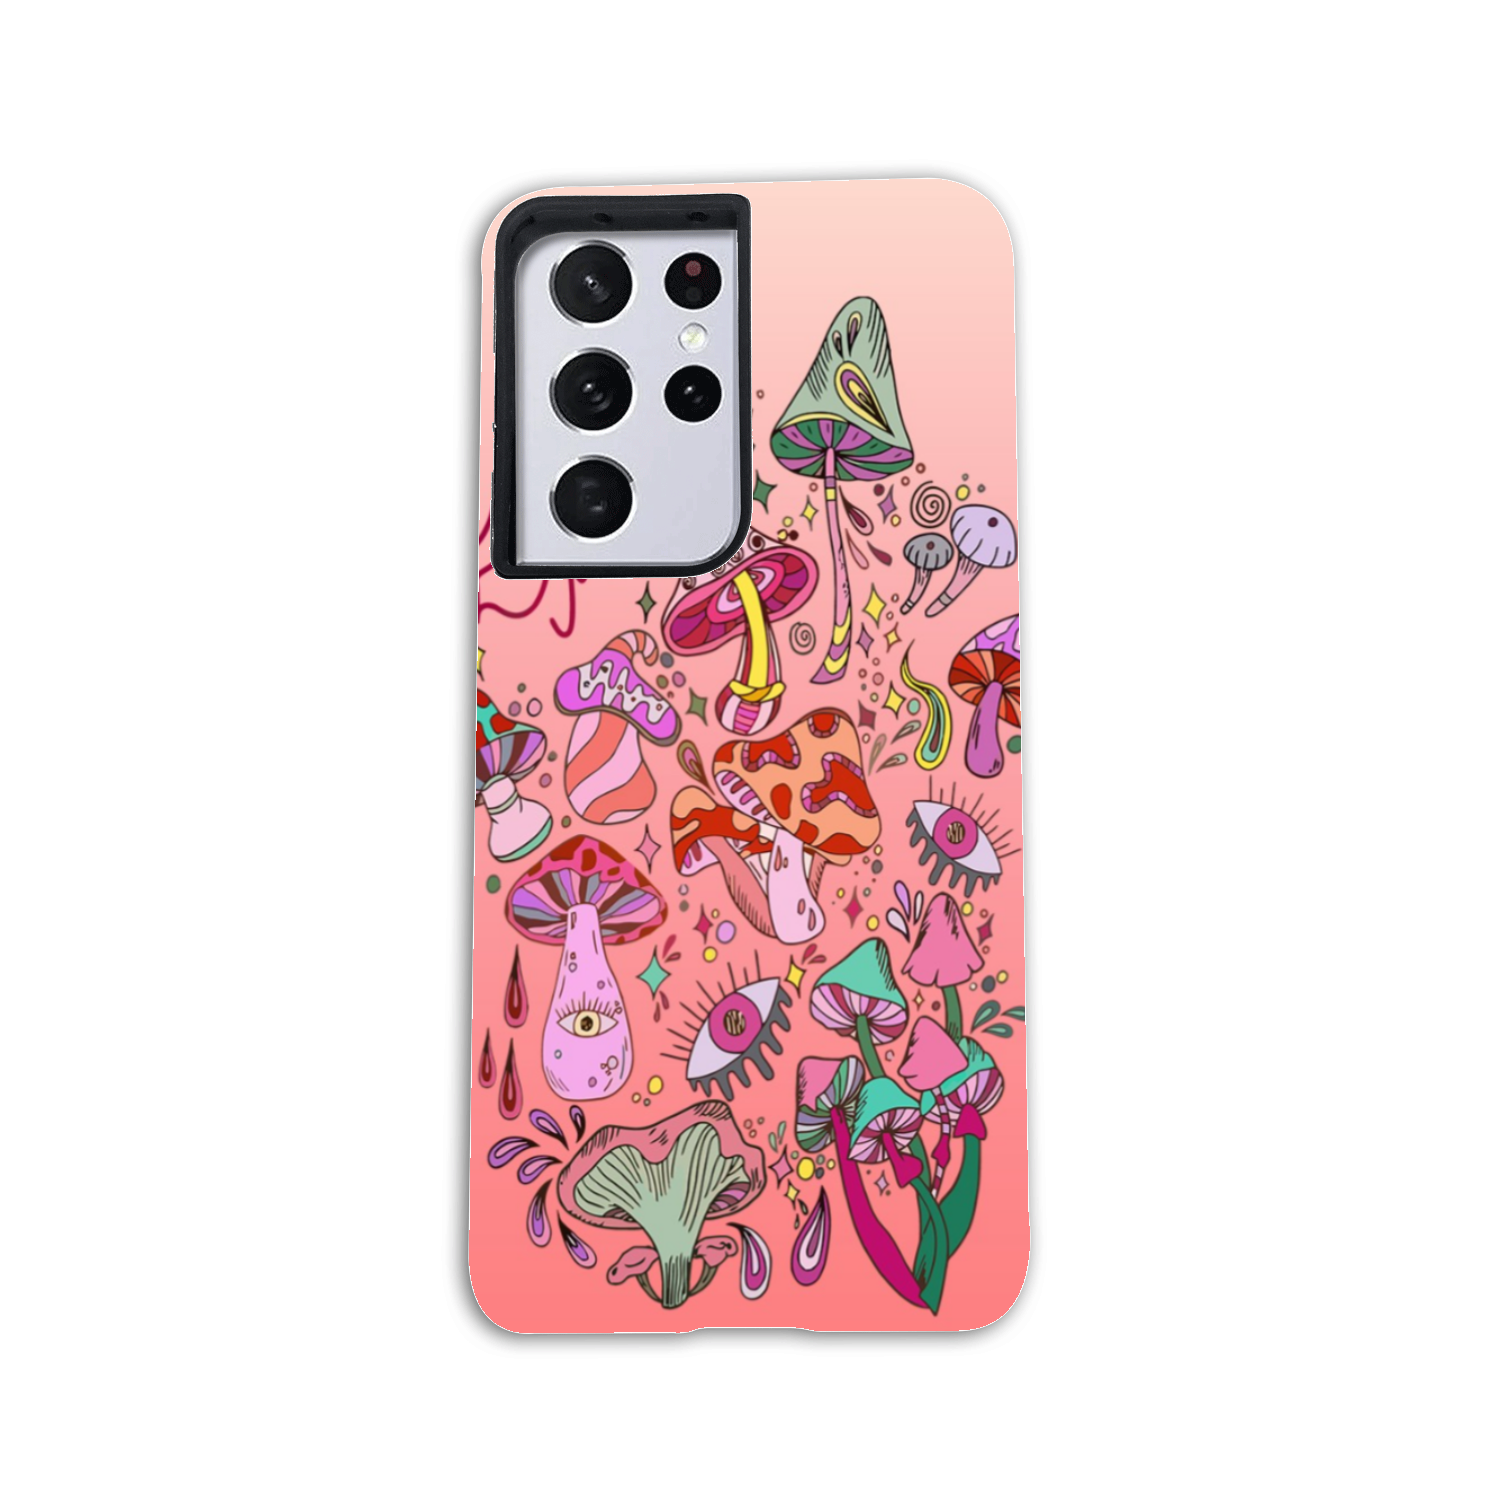 EAT ME PHONE CASE - TY0302234